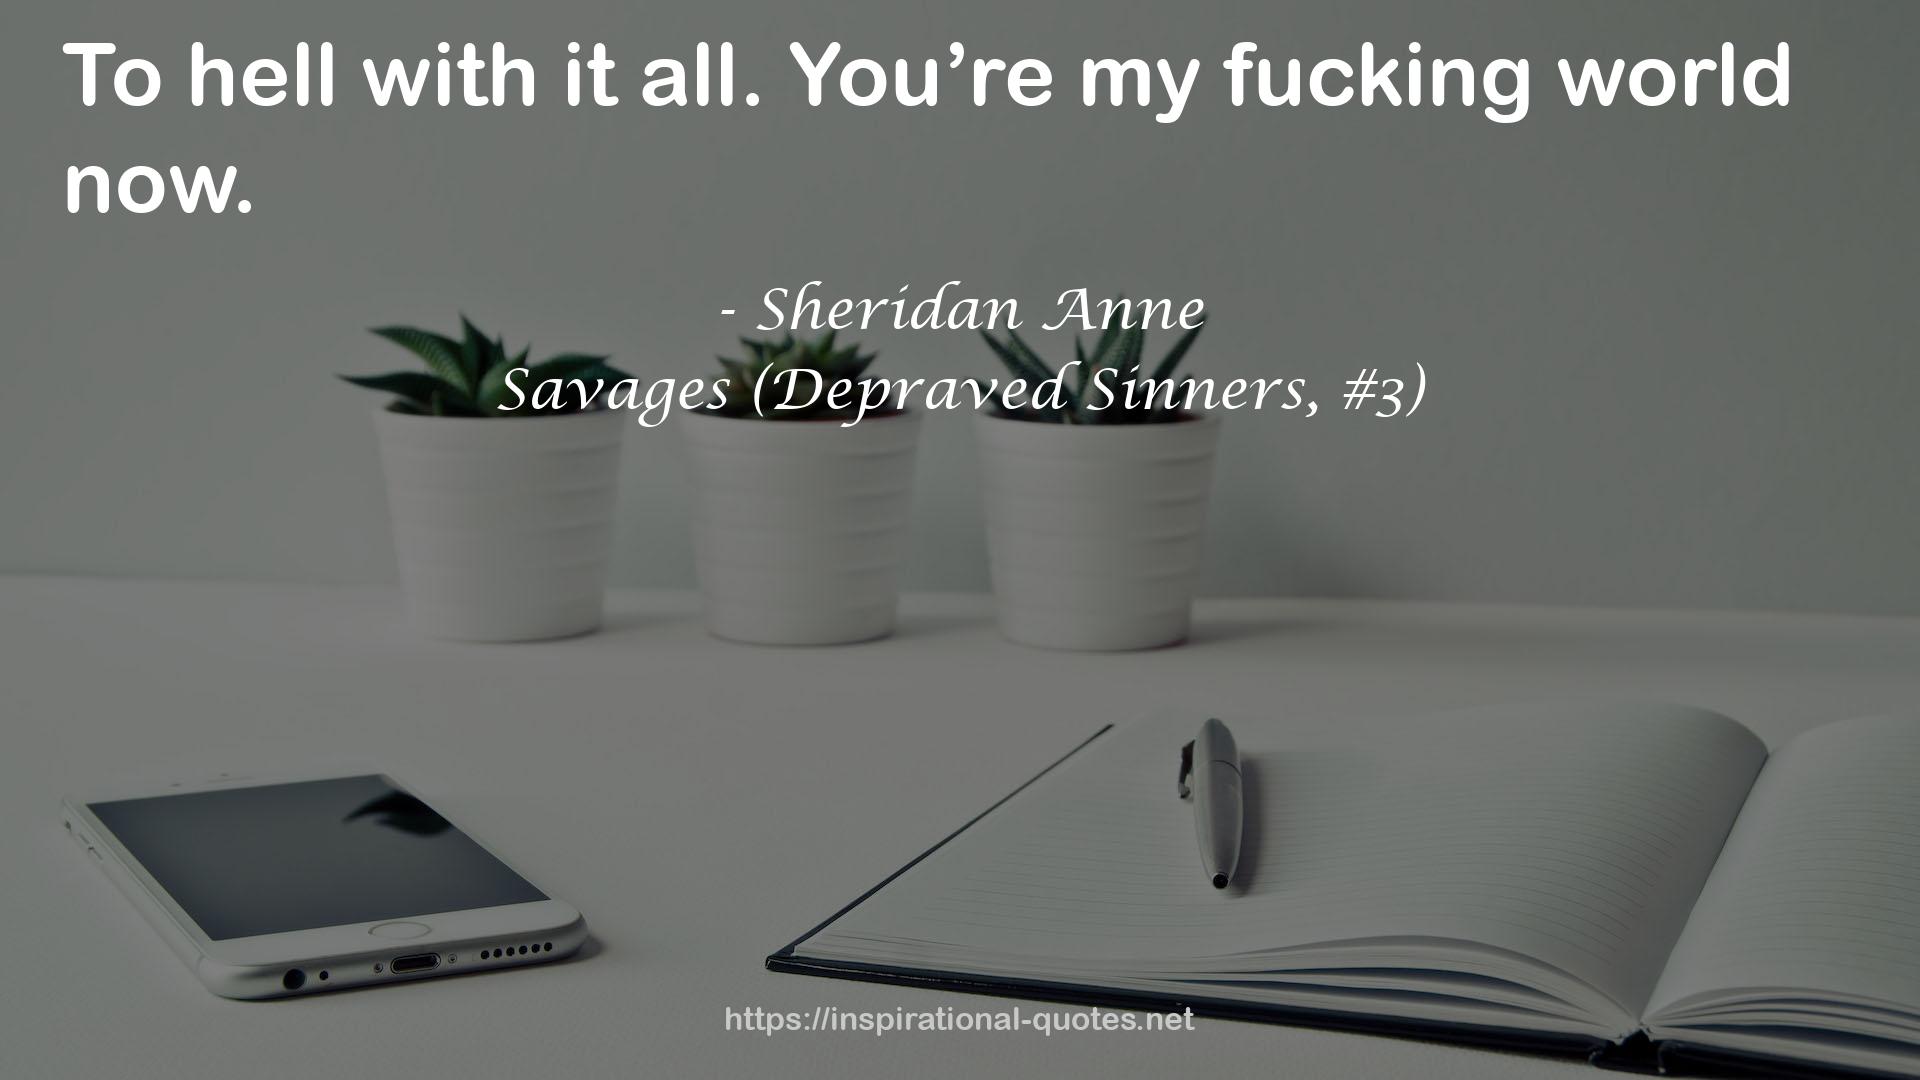 Savages (Depraved Sinners, #3) QUOTES